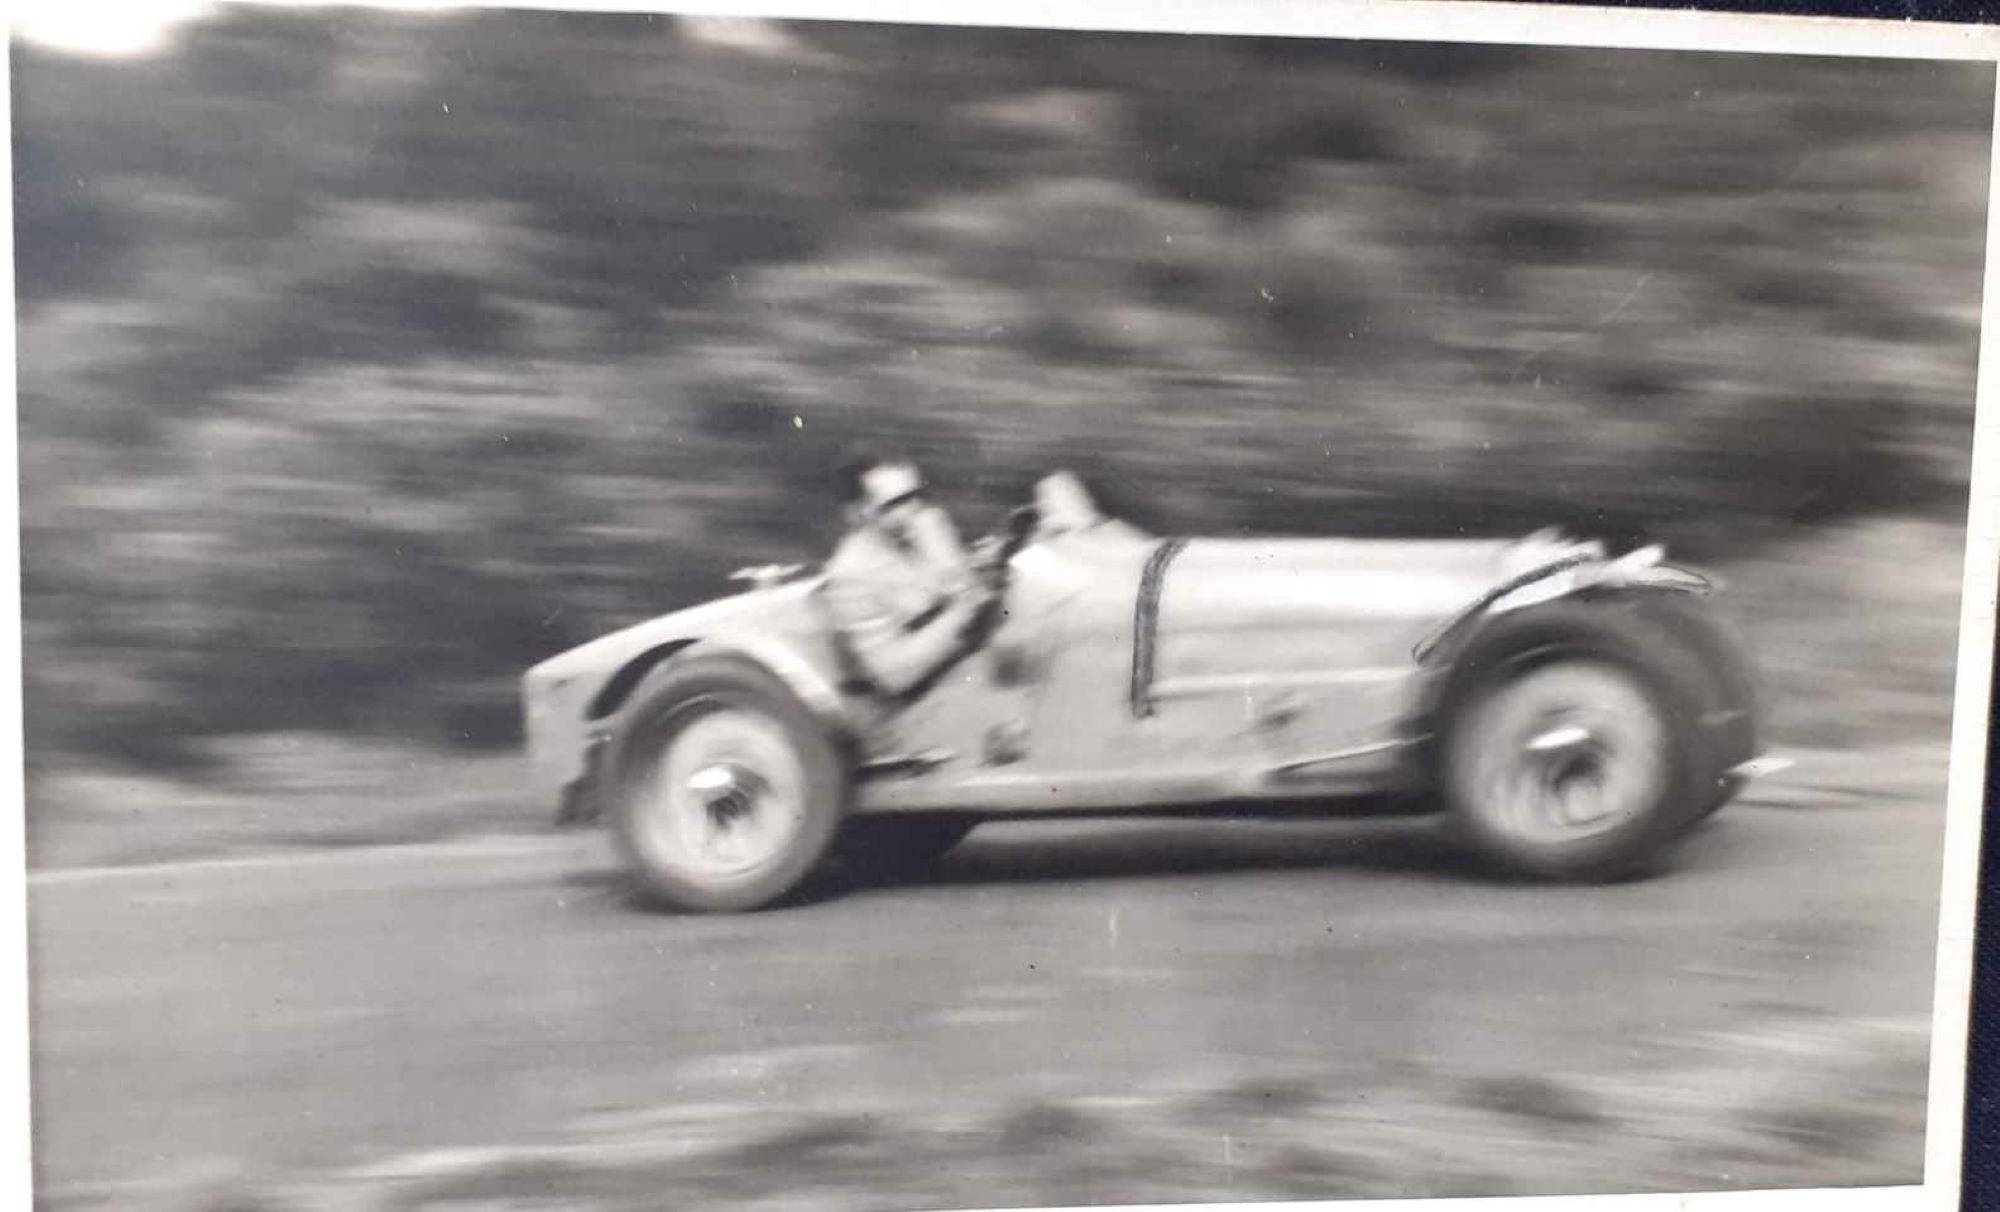 Name:  NSCC 1950 #0116 Bugatti T35 at speed - light colour 1950's - image Graeme Wells arch Anthony Wel.jpg
Views: 195
Size:  158.1 KB